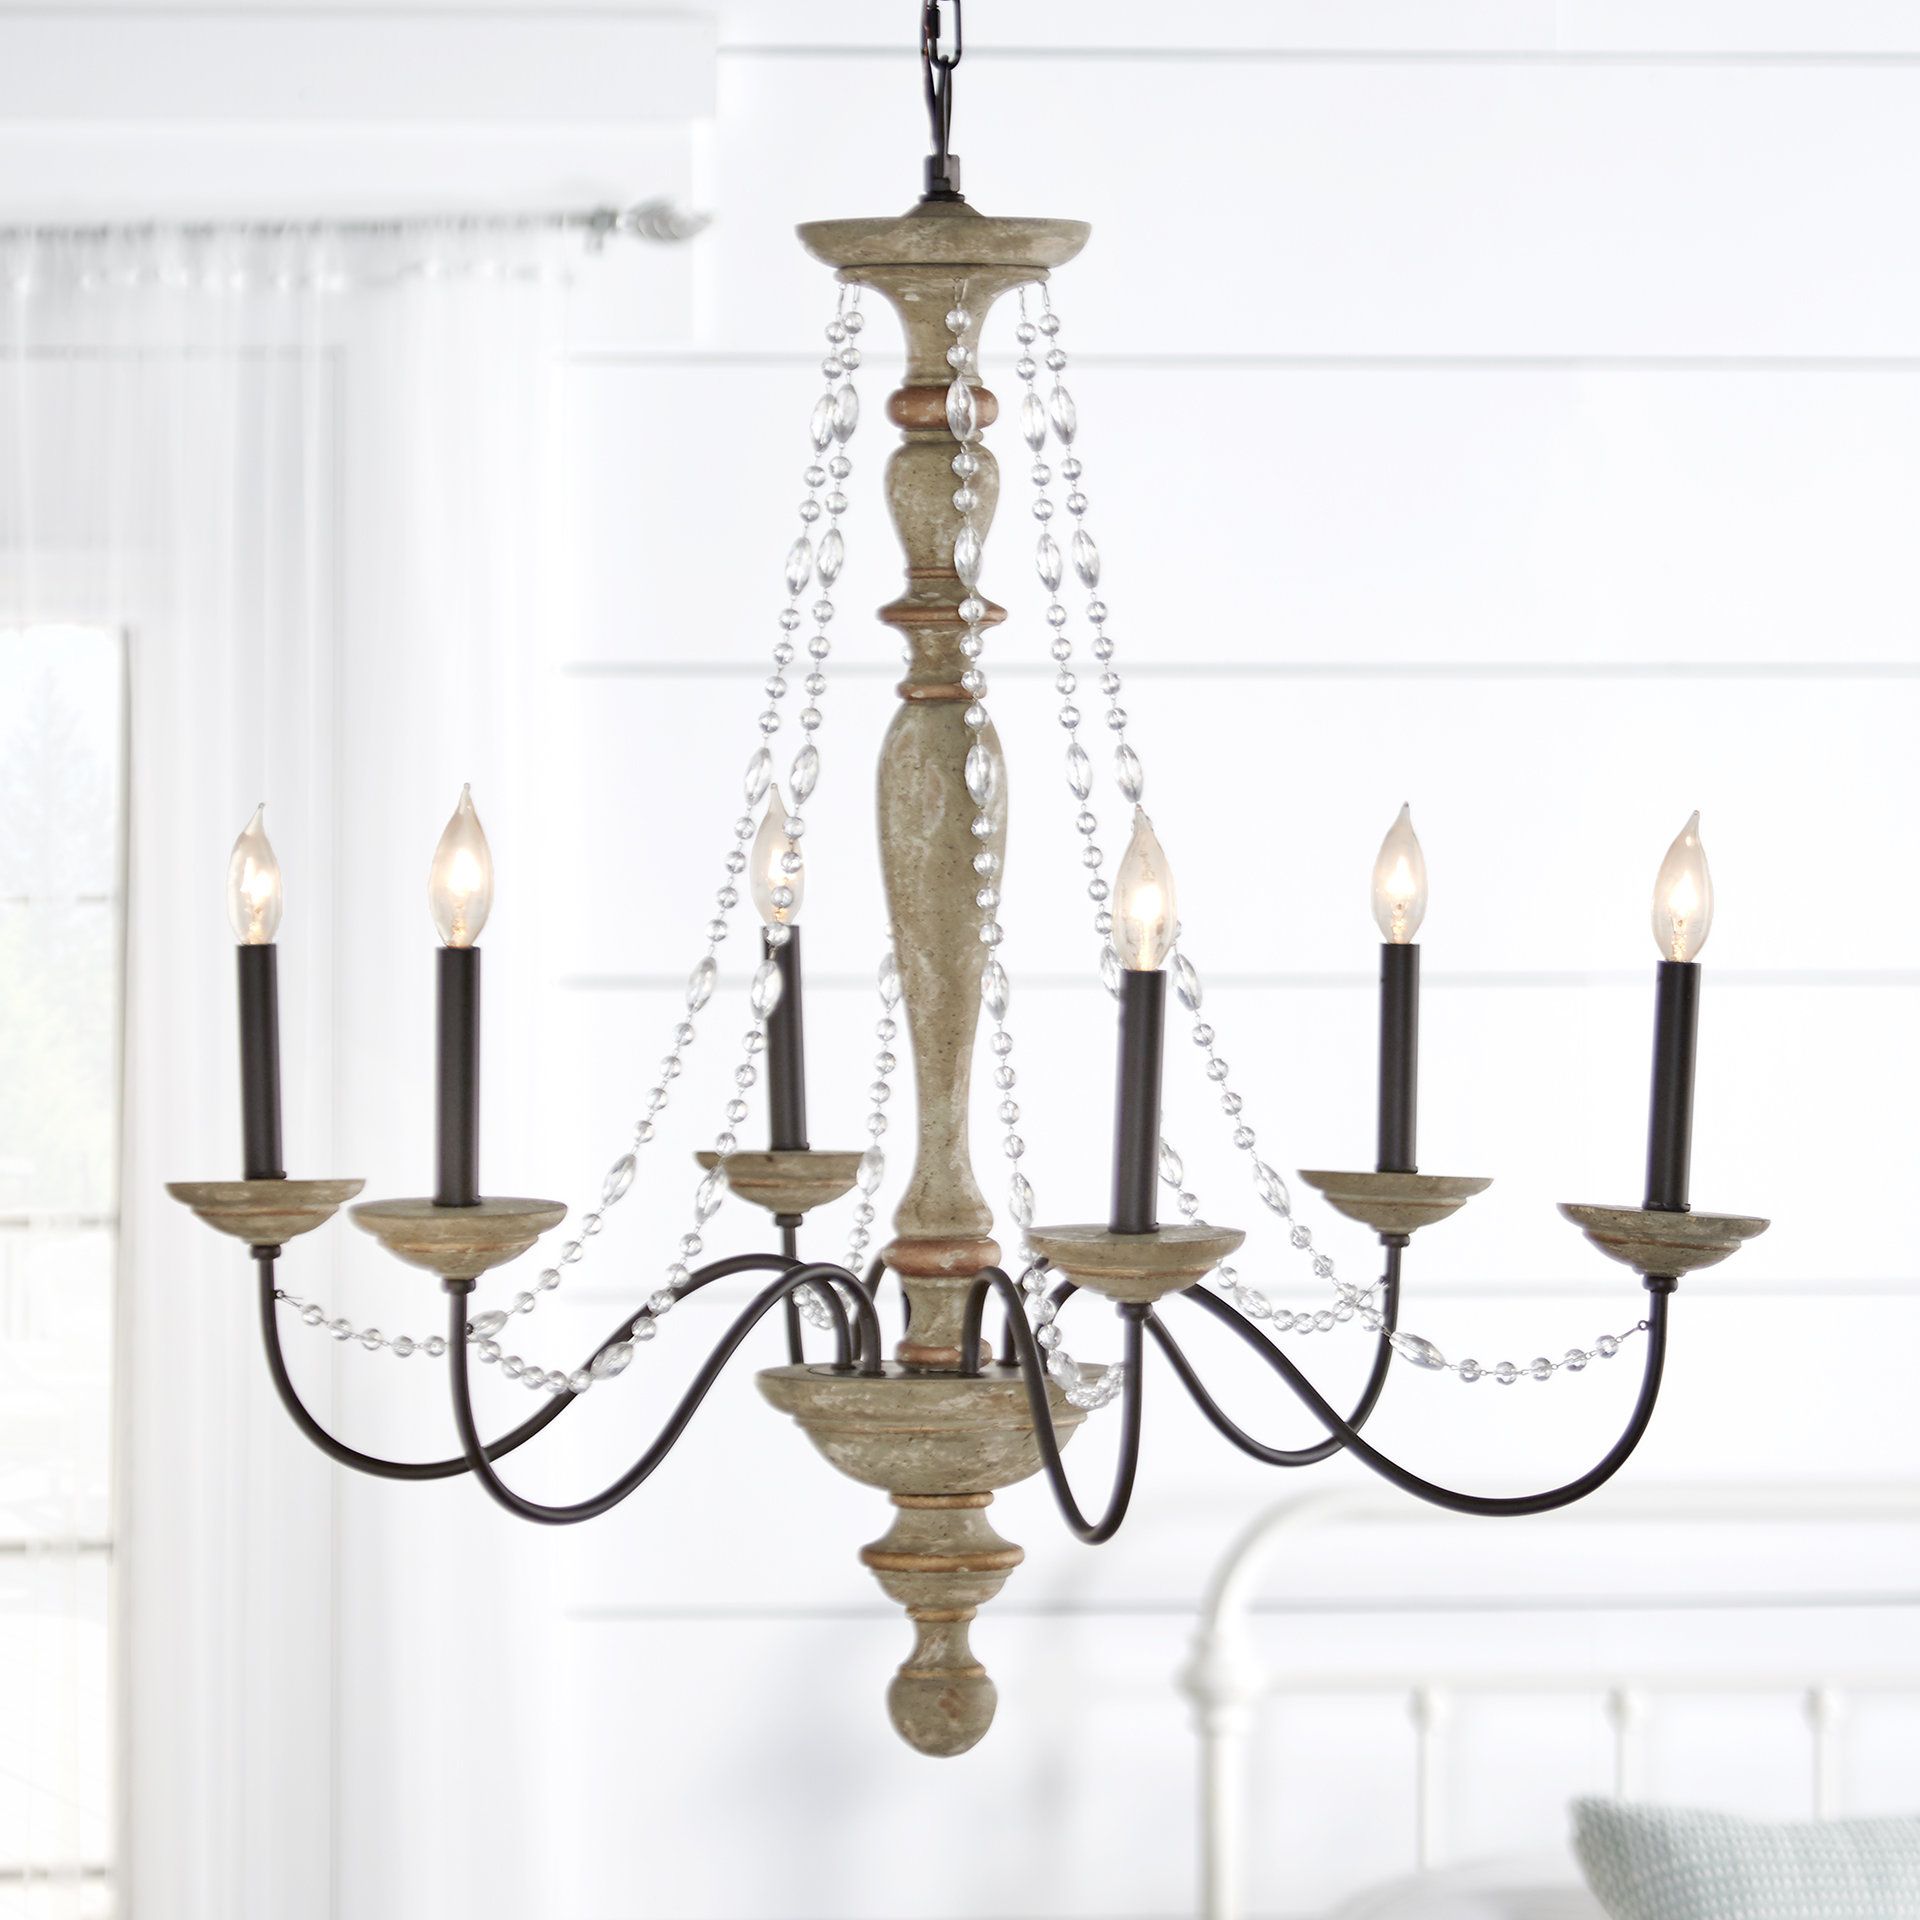 Three Posts Brennon 6 Light Candle Style Chandelier With Famous Watford 9 Light Candle Style Chandeliers (View 18 of 25)